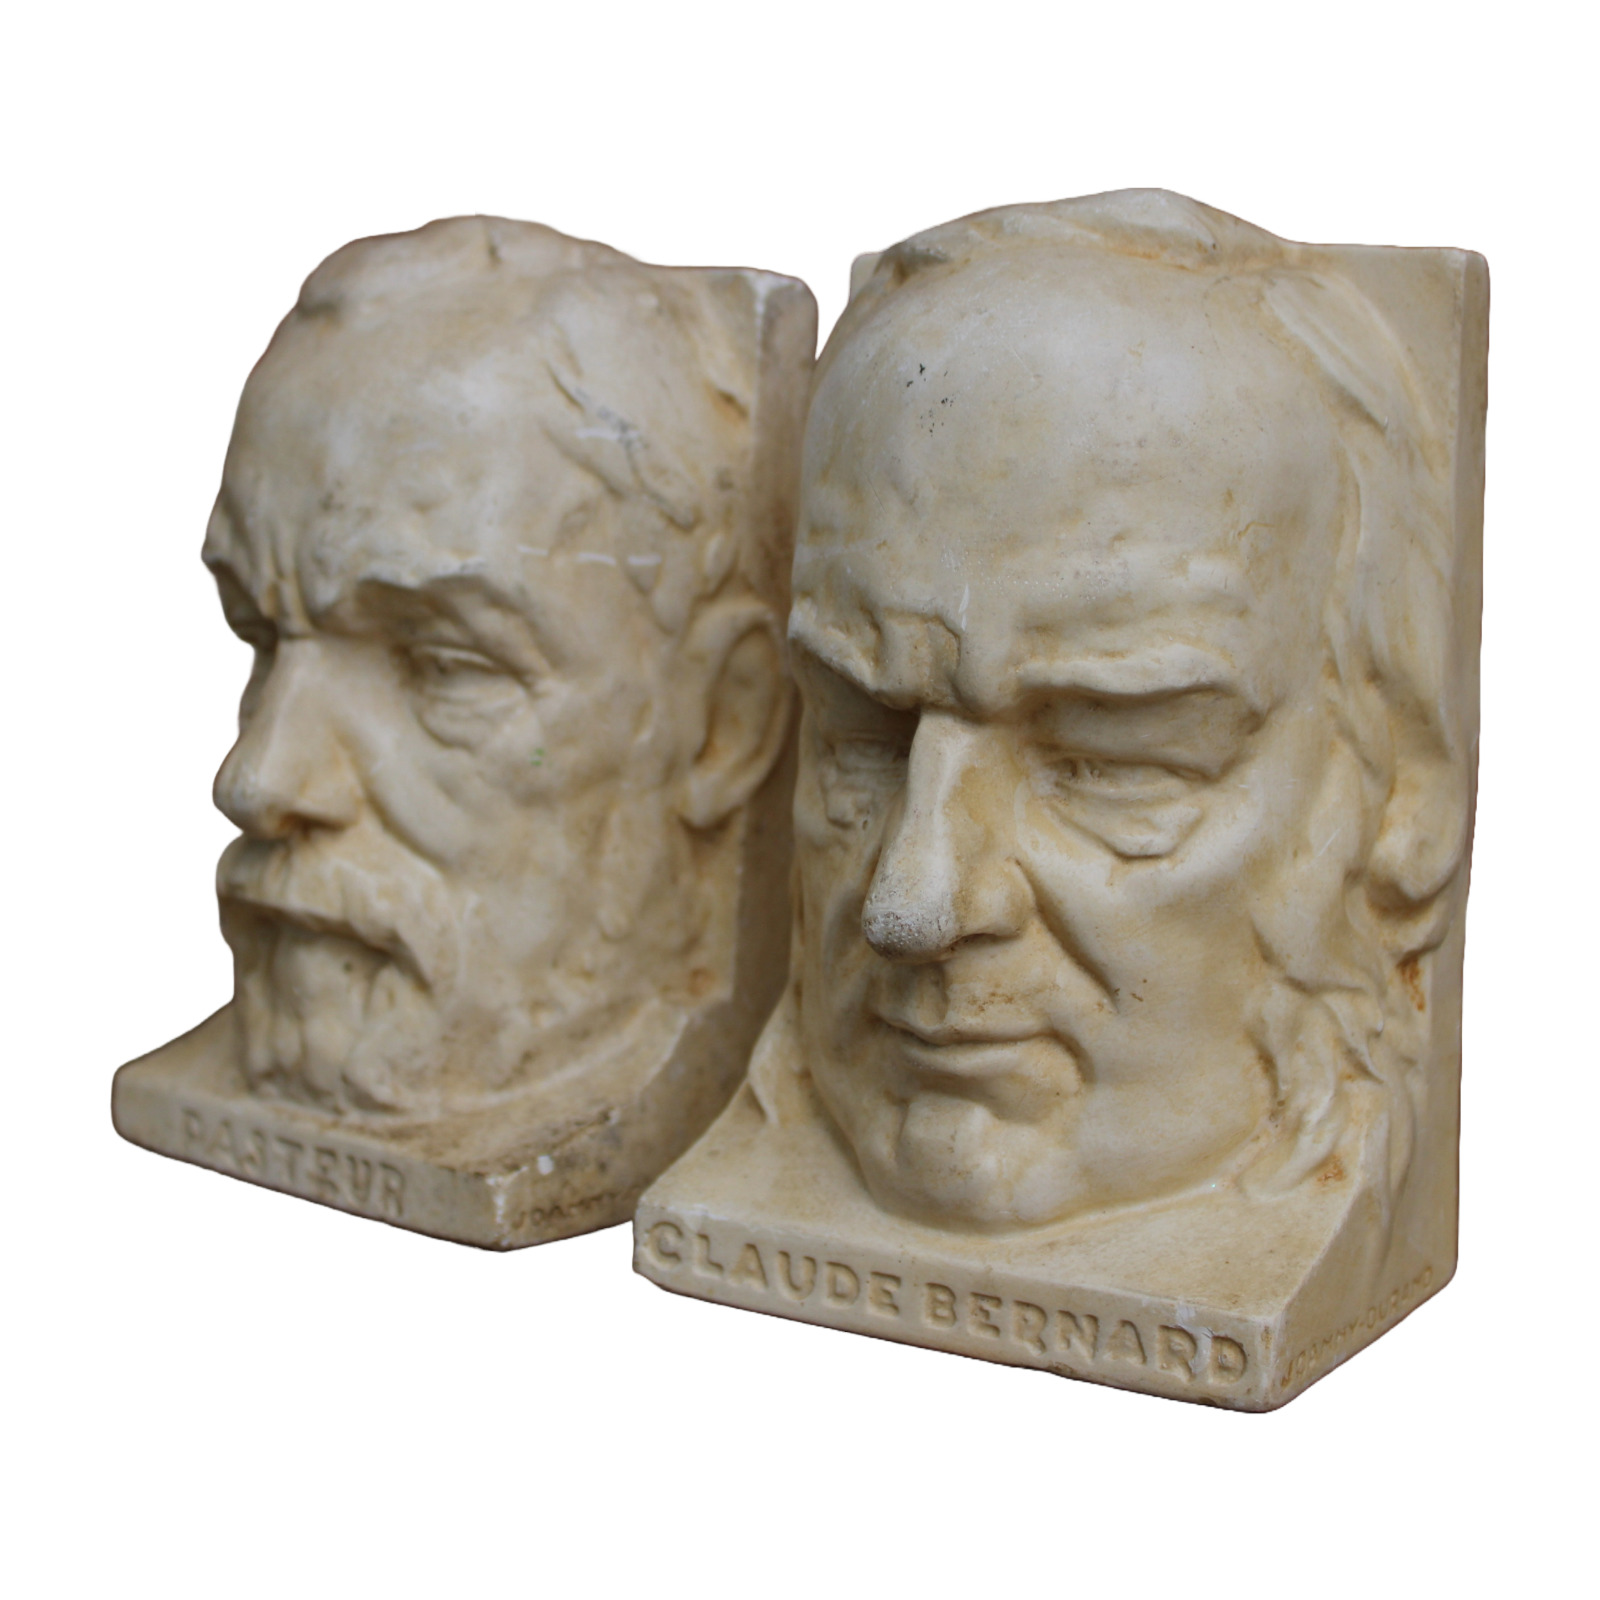 Stunning Antique Bookends of Pasteur and Claude Bernard, Signed by Joanny Durand